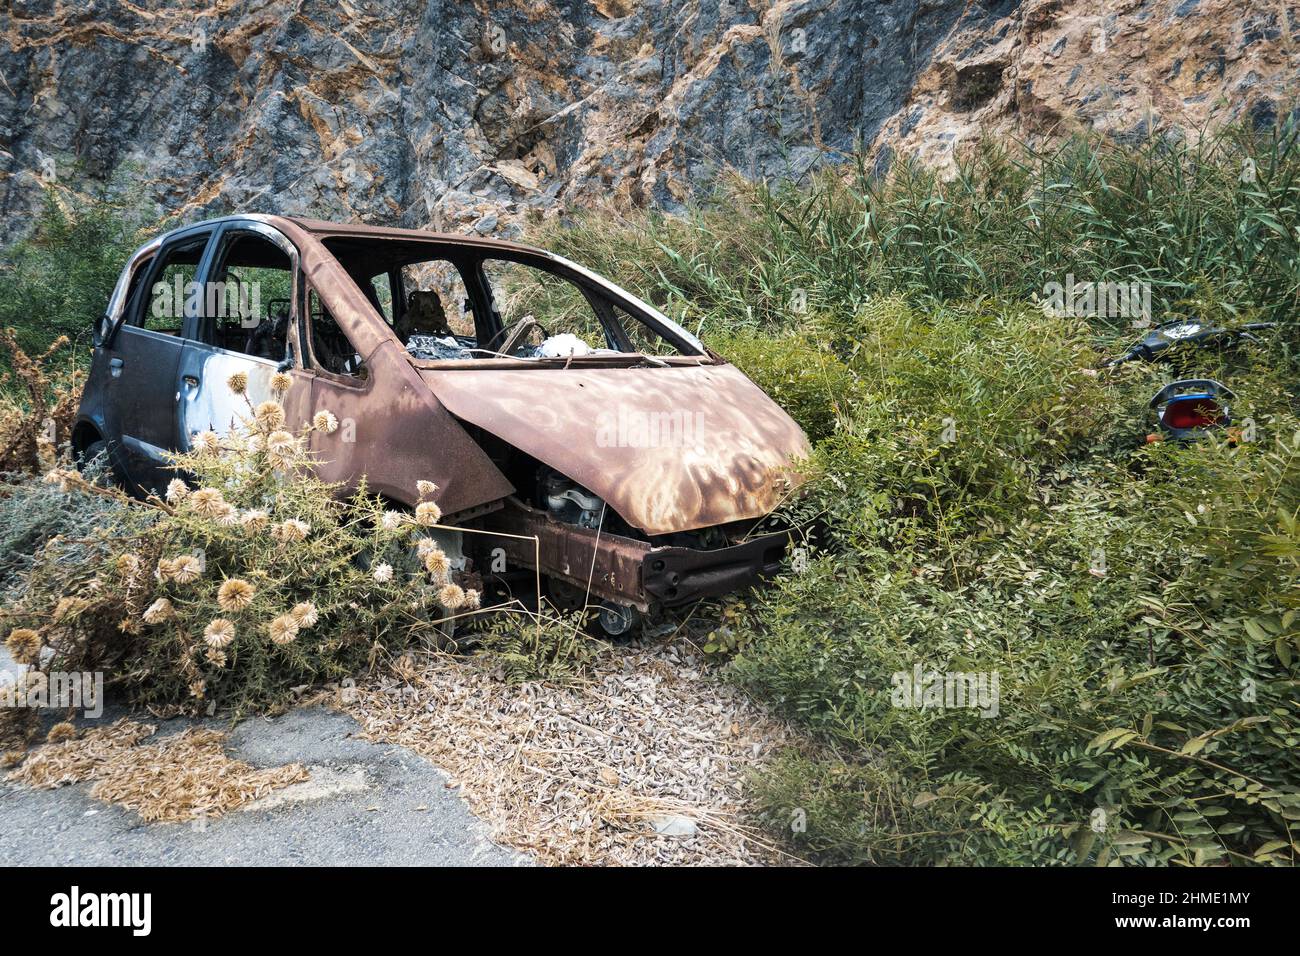 Old broken car surrounded by bushes against rock formations Stock Photo